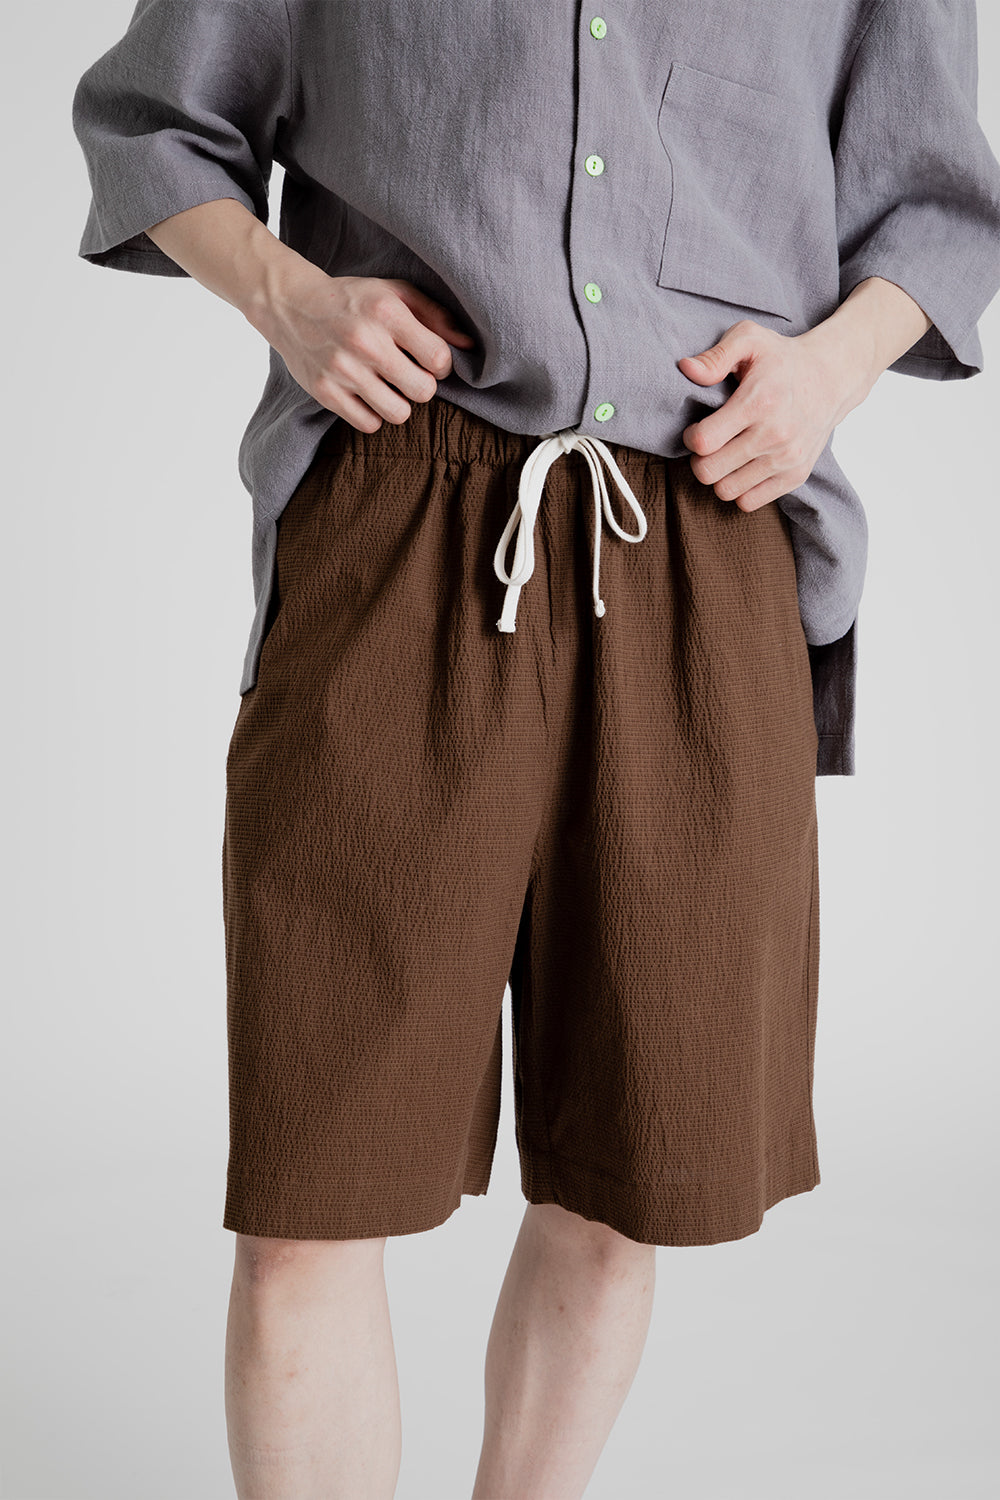 S.K Manor Hill Barrack Shorts in Brown Puckered